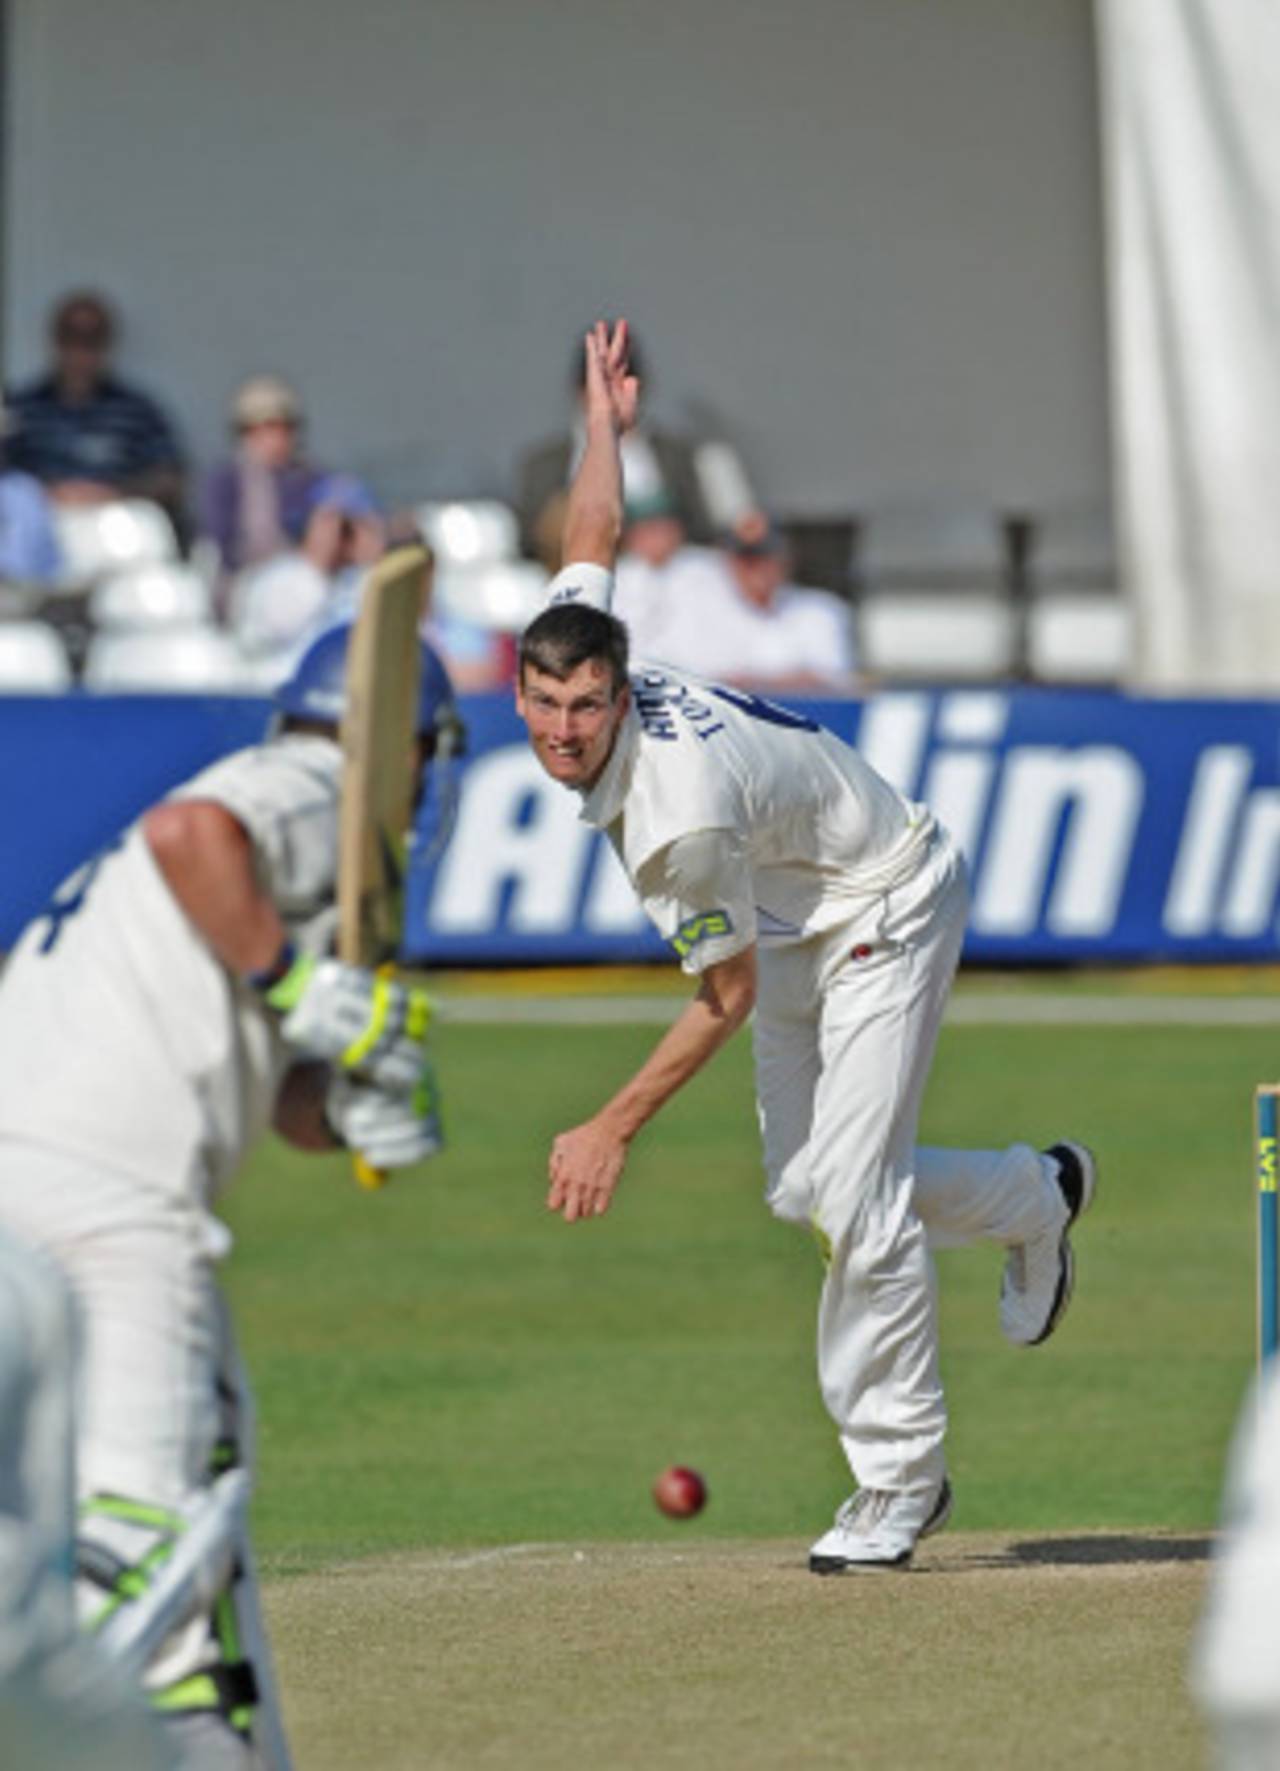 Reece Topley has agreed to a one-year professional contract after a promising start to his first-class career&nbsp;&nbsp;&bull;&nbsp;&nbsp;Bipin Patel